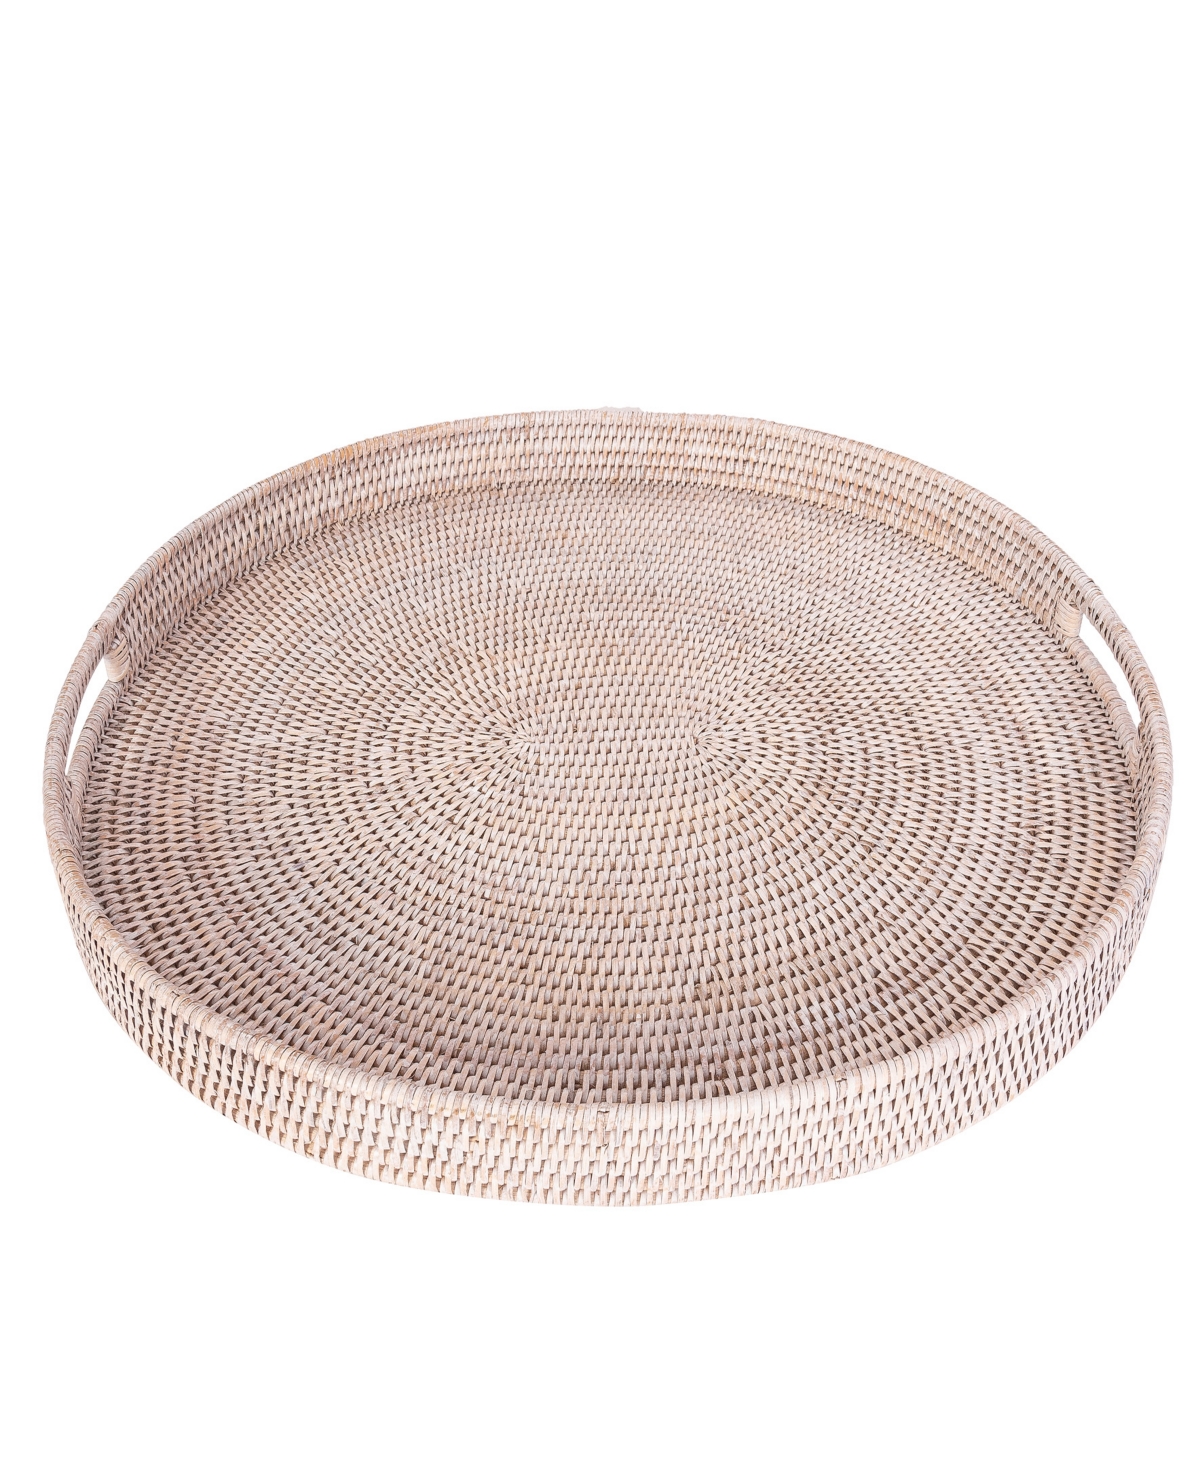 Shop Artifacts Trading Company Artifacts Rattan Oval Ottoman Tray With Cutout Handles In White Wash